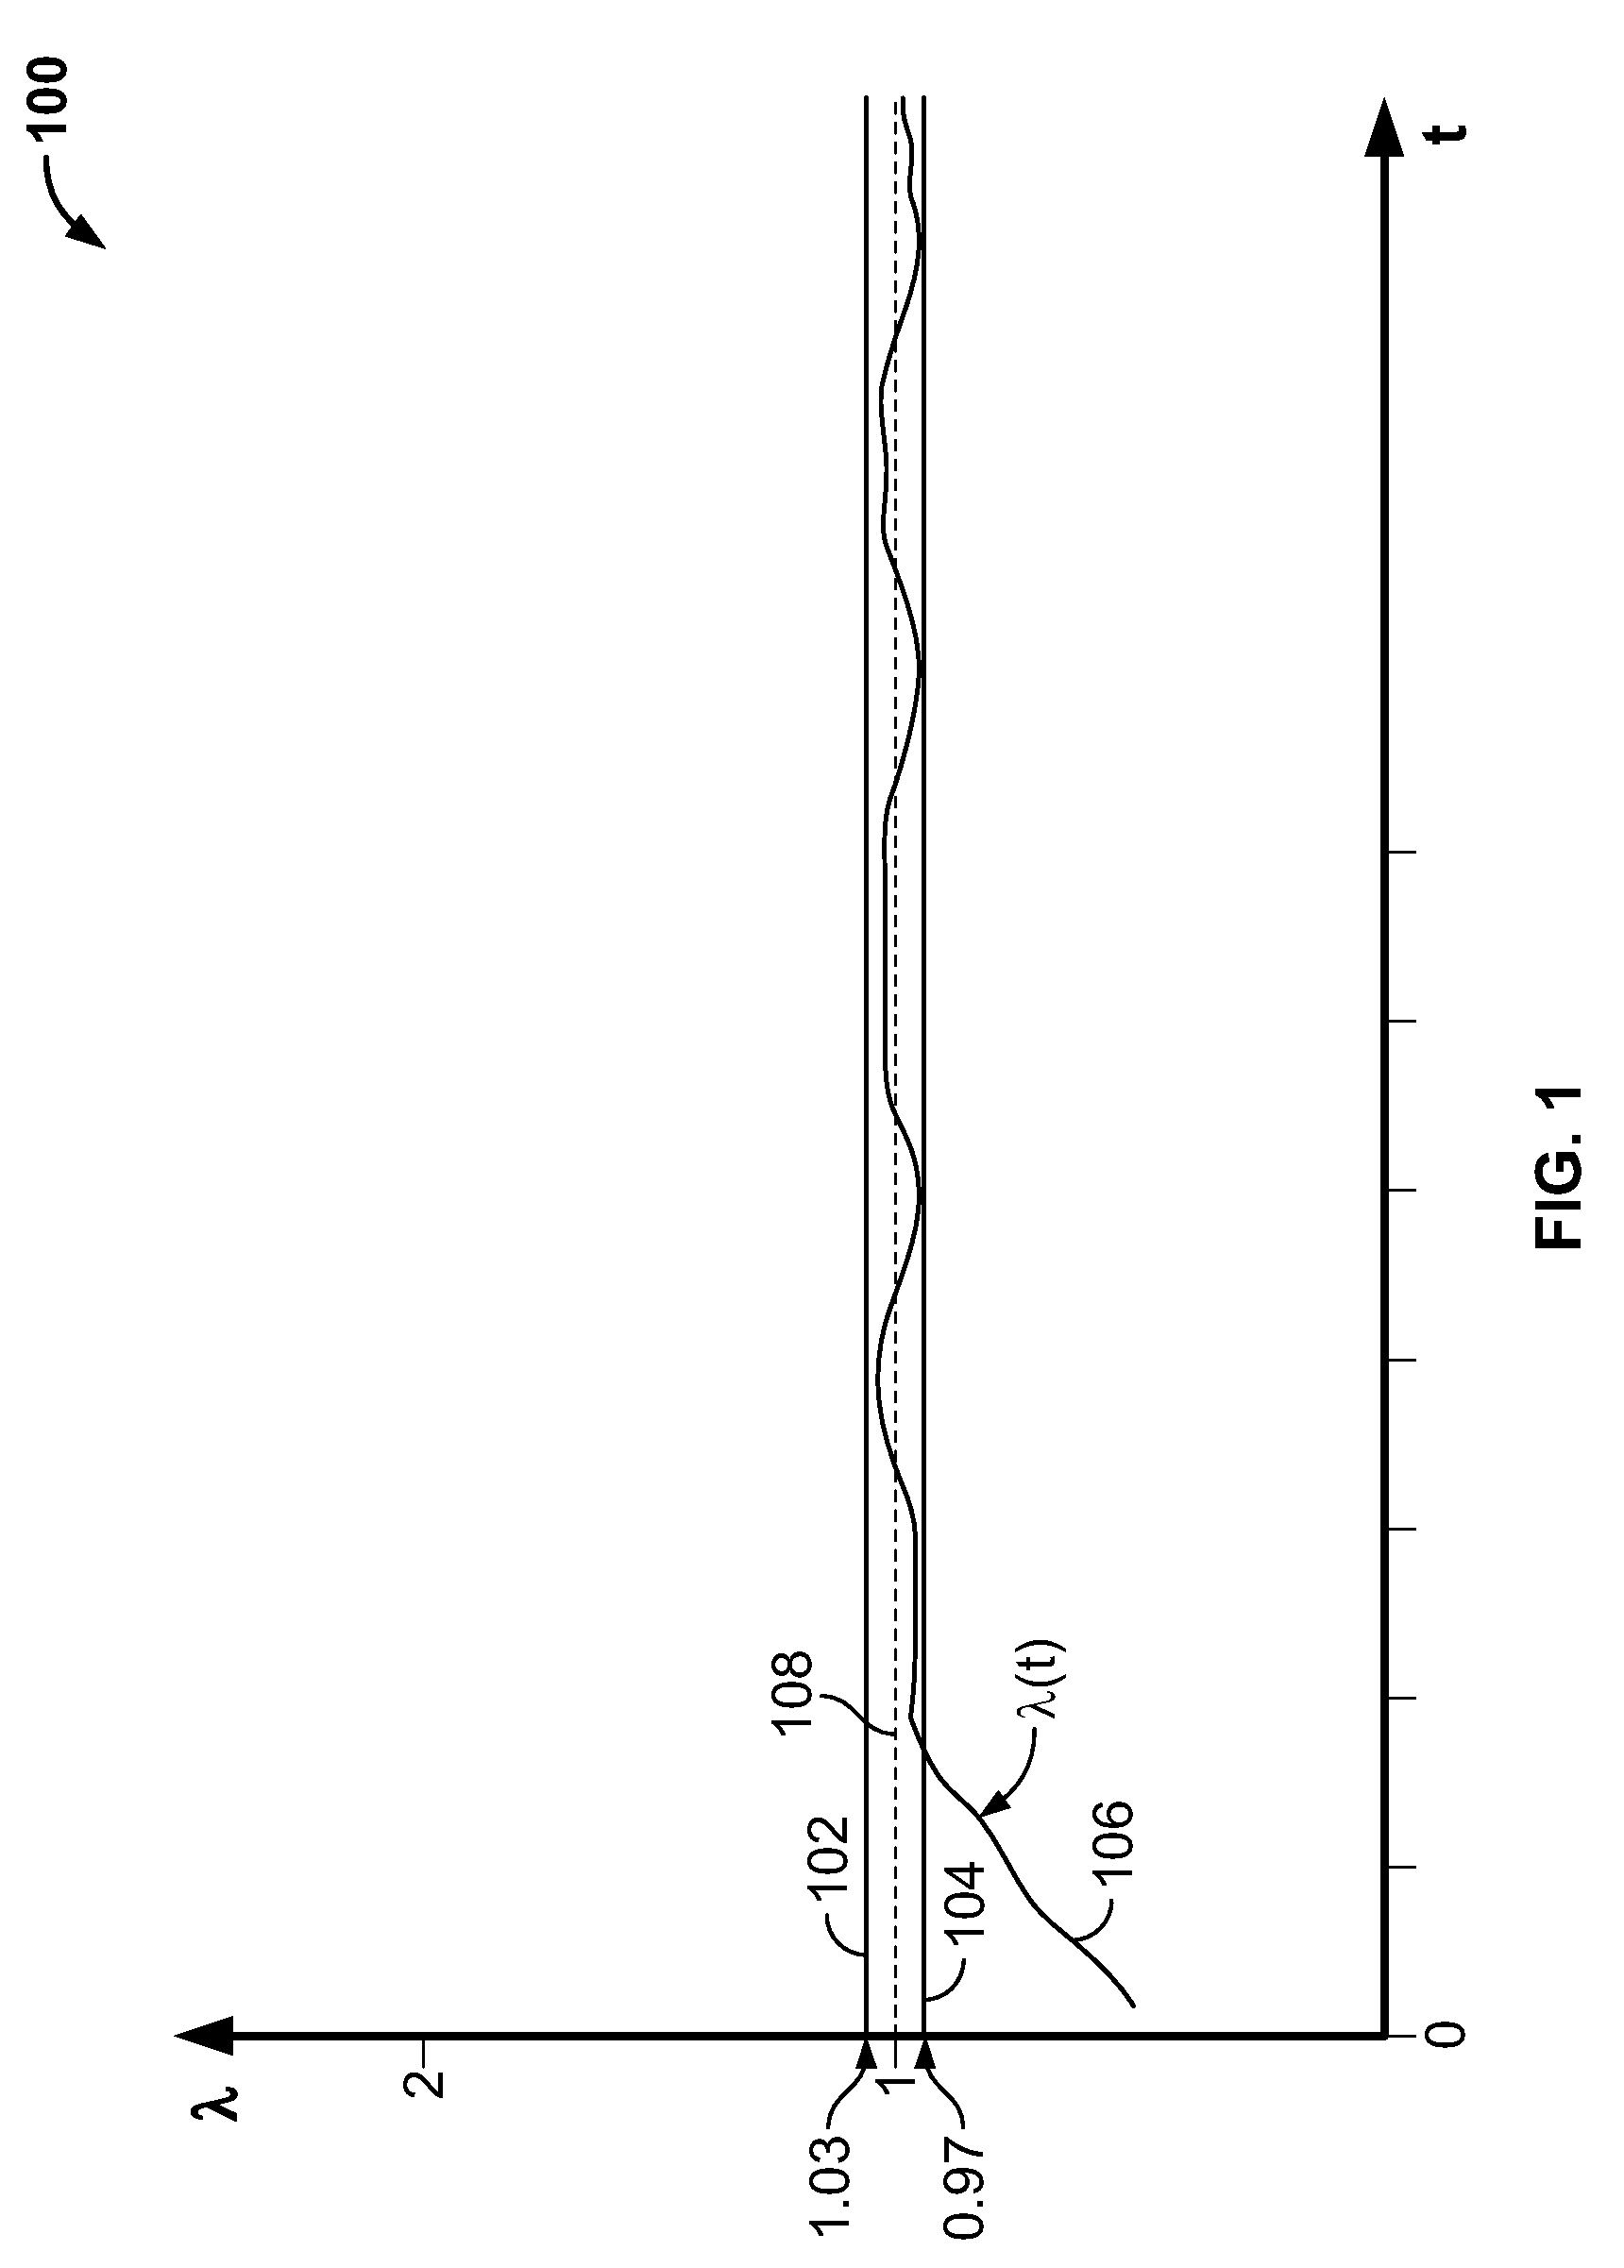 Bi-fuel engine with variable air fuel ratio